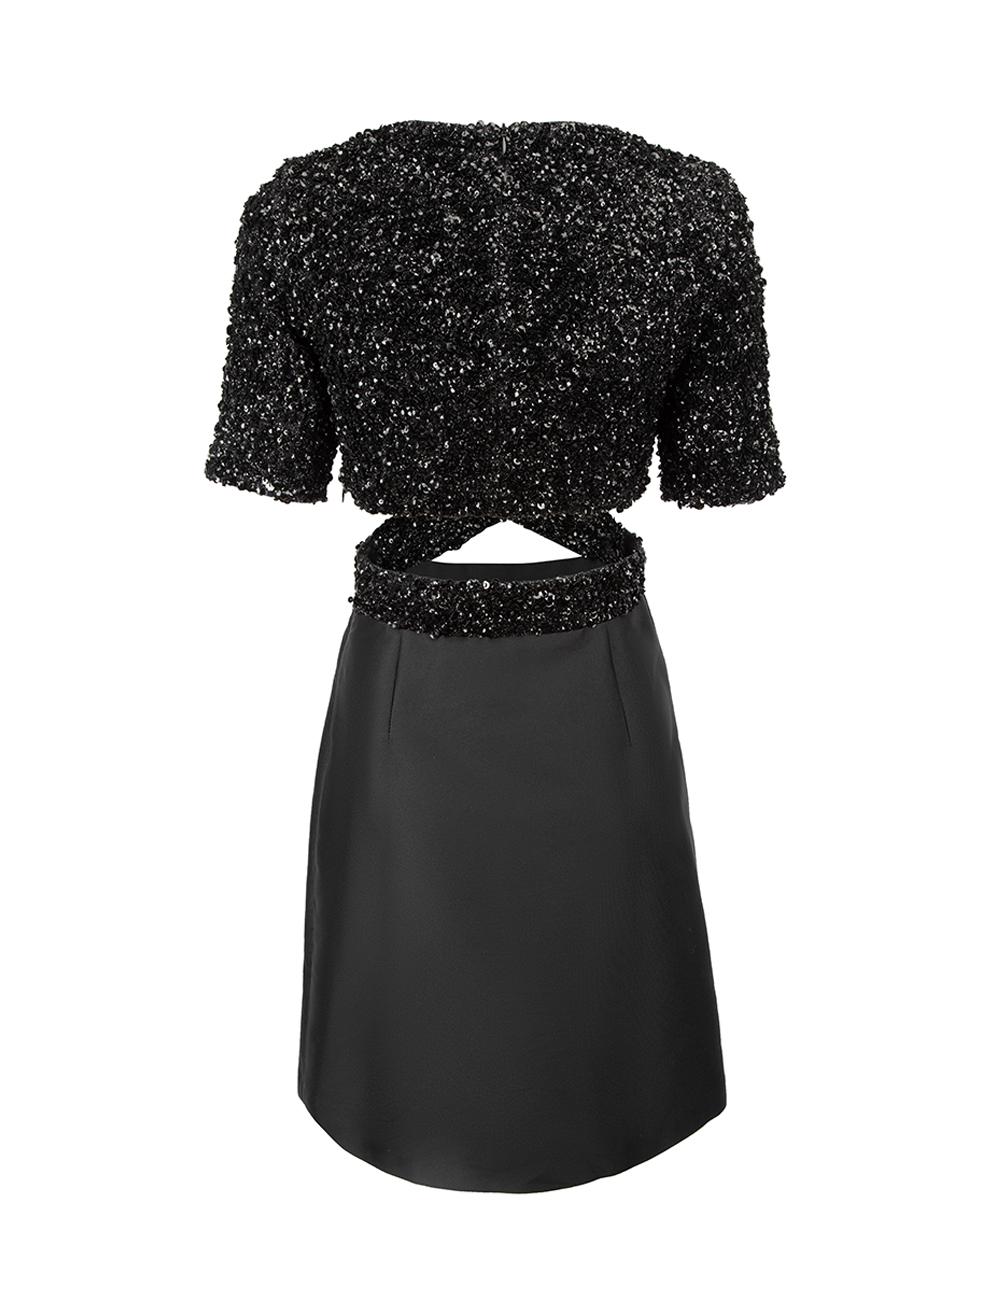 3.1 Phillip Lim Black Embellished Cut Out Accent Mini Dress Size XS In Good Condition In London, GB